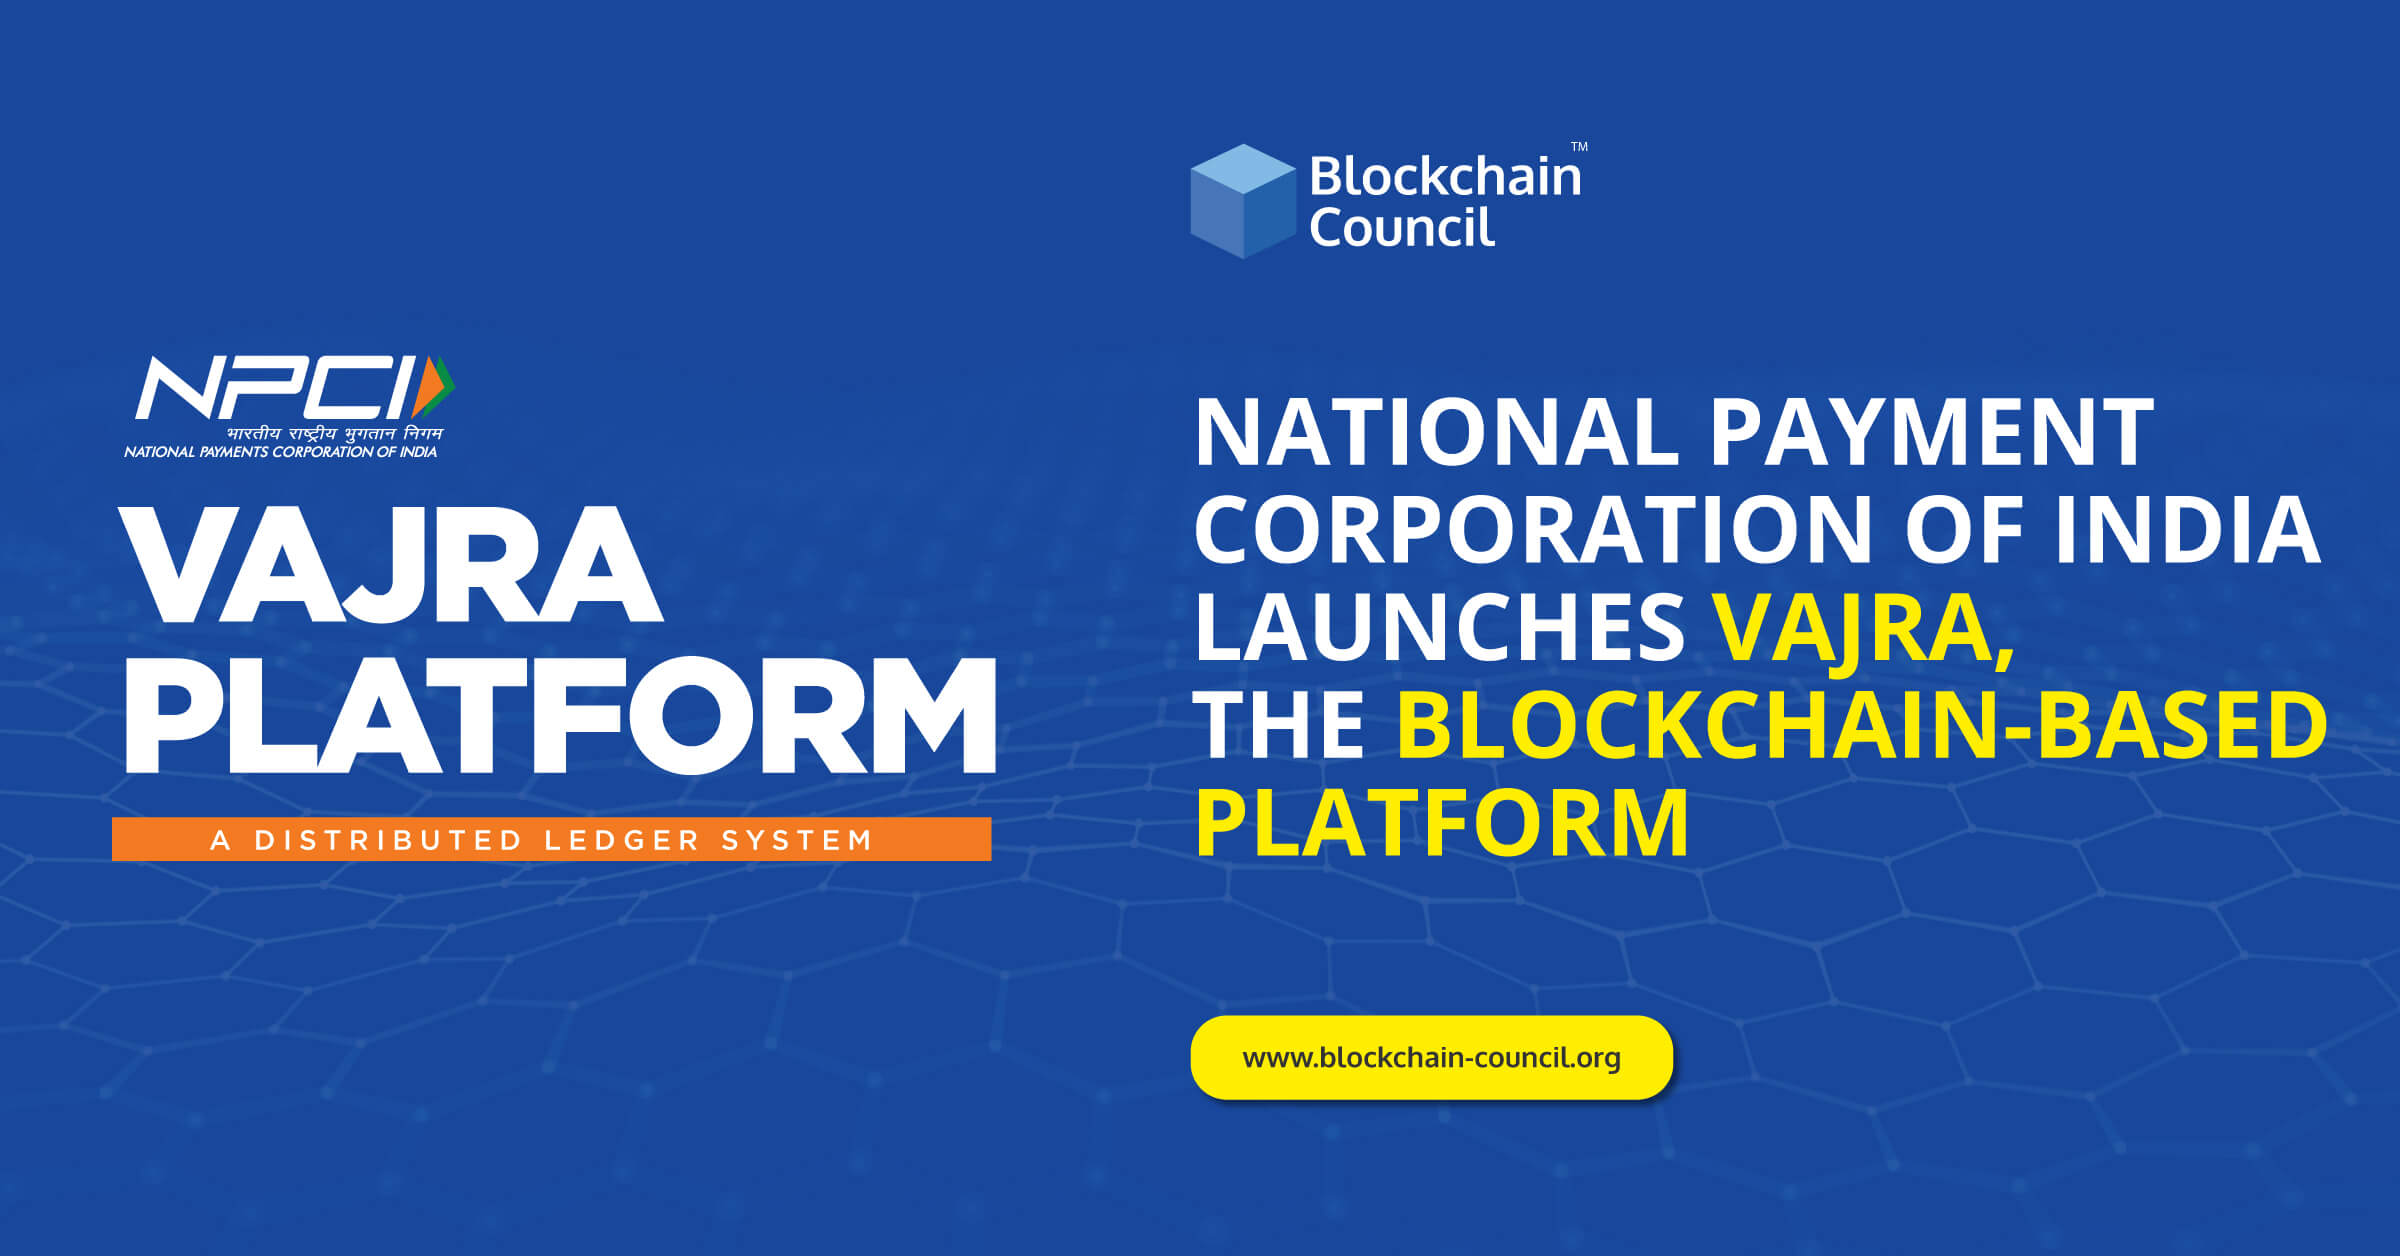 National-Payment-Corporation-of-India-Launches-Varja,-the-Blockchain-Based-Platform